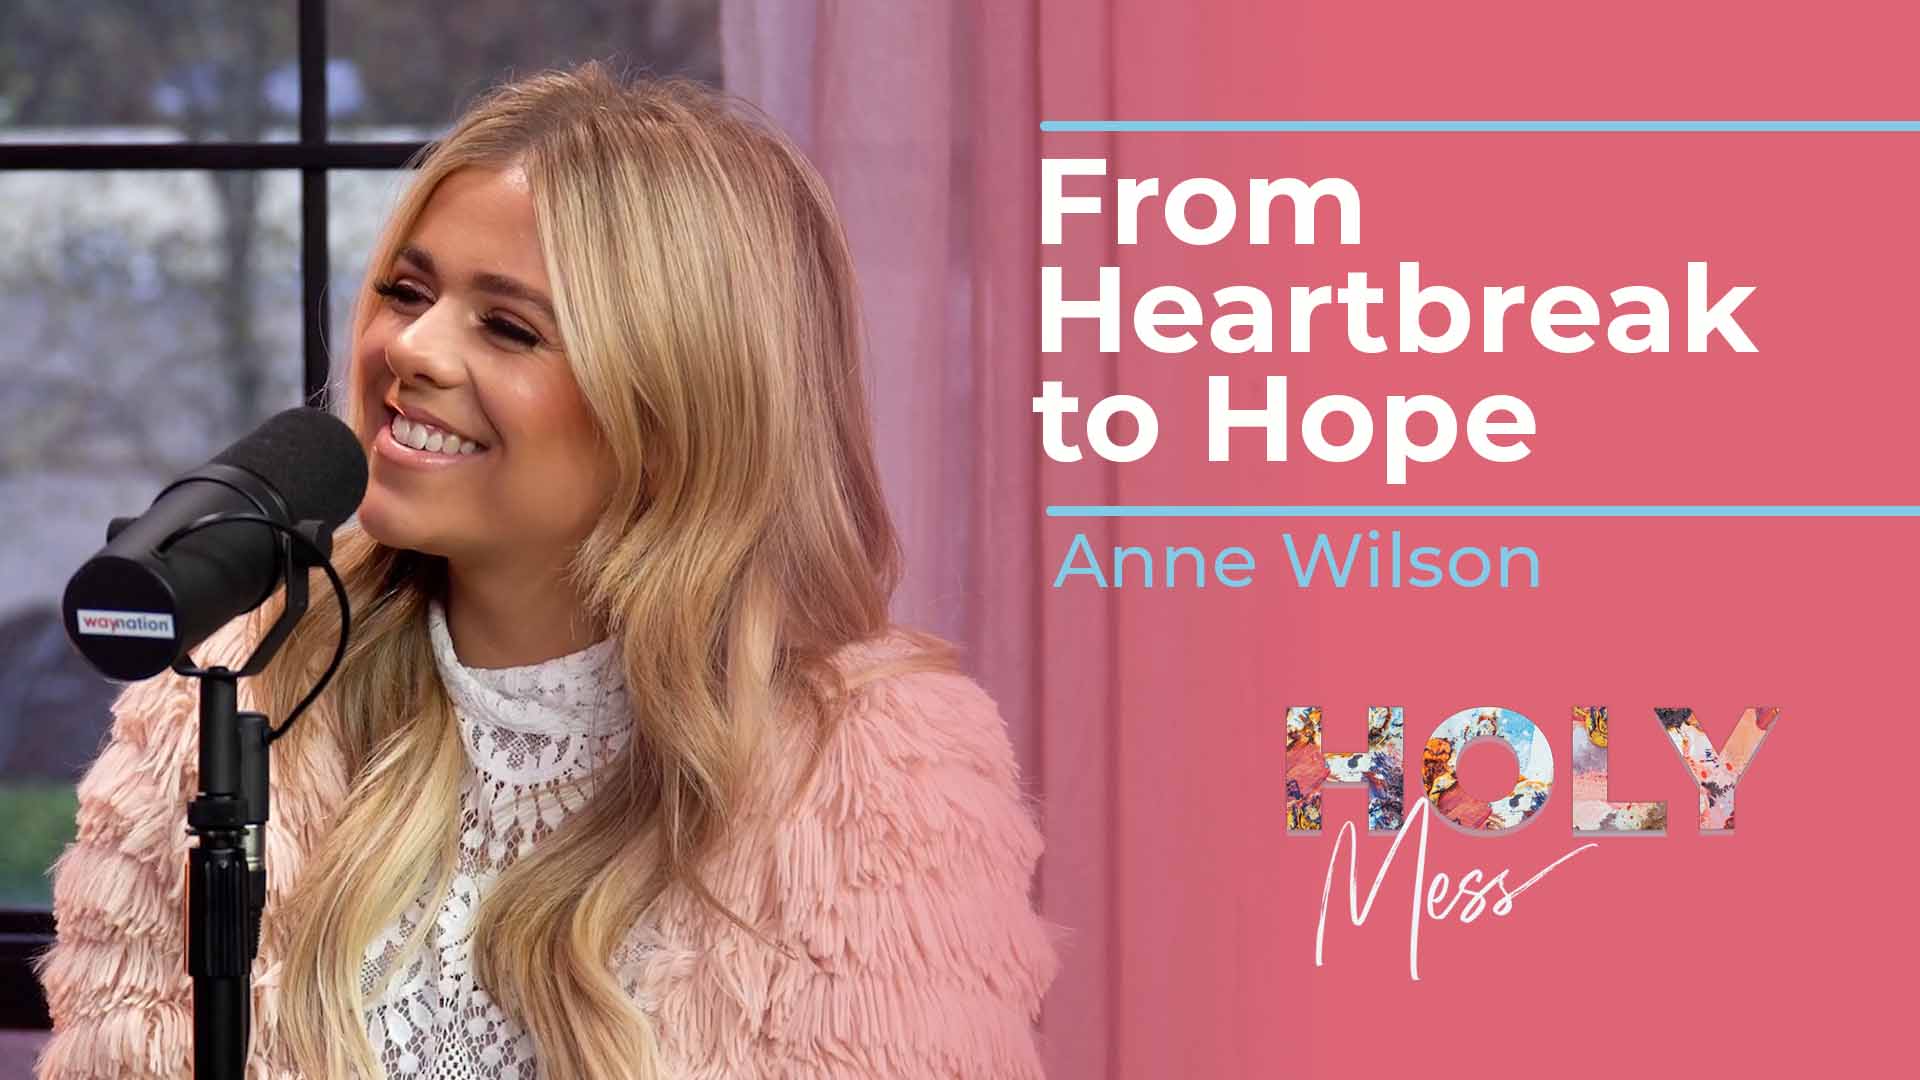 Anne Wilson's New Book "My Jesus: From Heartbreak to Hope" and How to Handle Grief During the Holidays